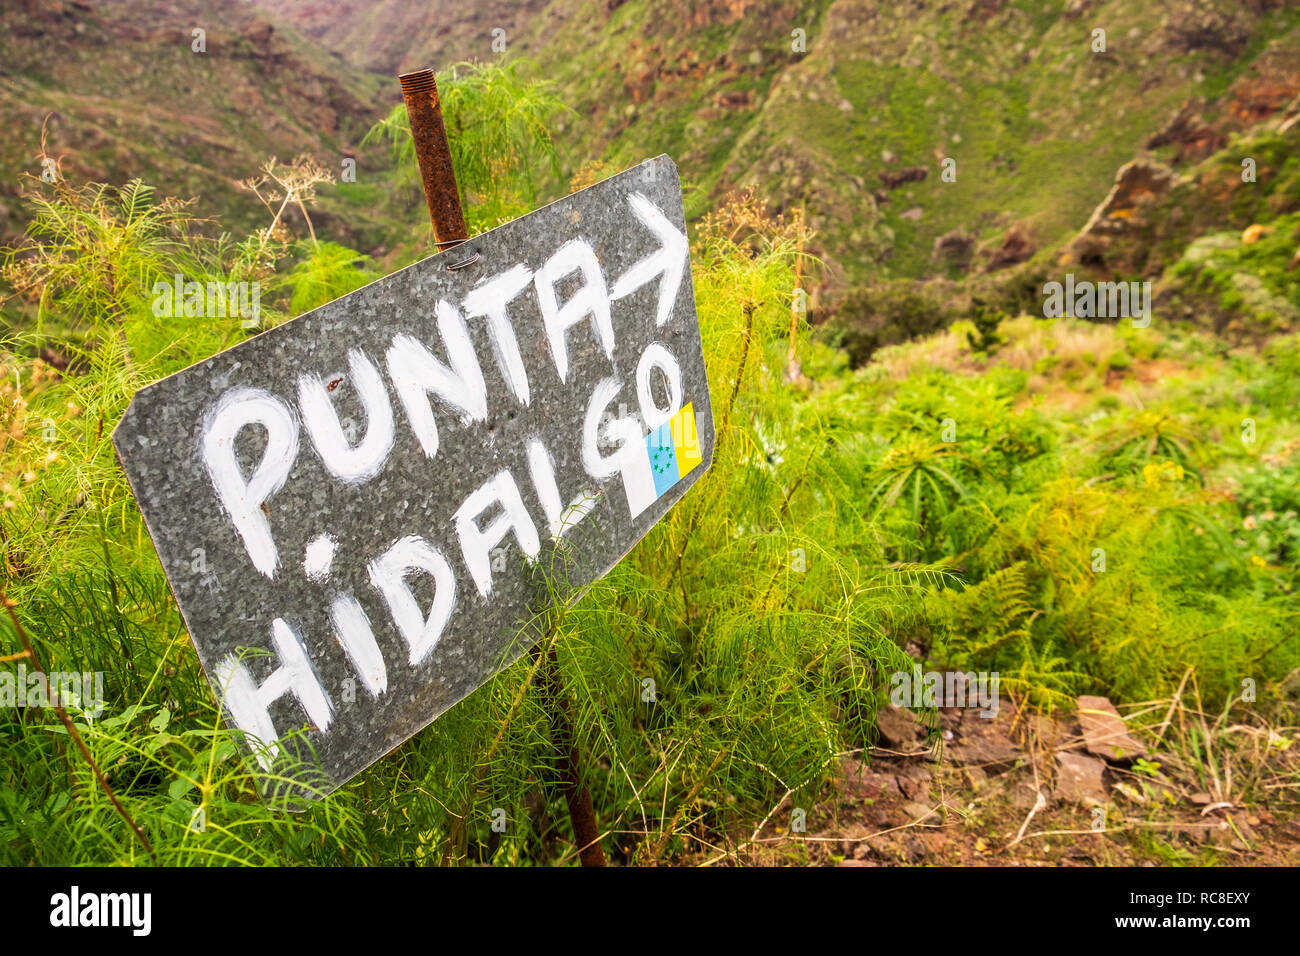 Hand painted metal sign indicating the direction of the walking route to Punta Hidalgo from El Batan, Anaga, Tenerife, Canary Islands, Spain Stock Photo